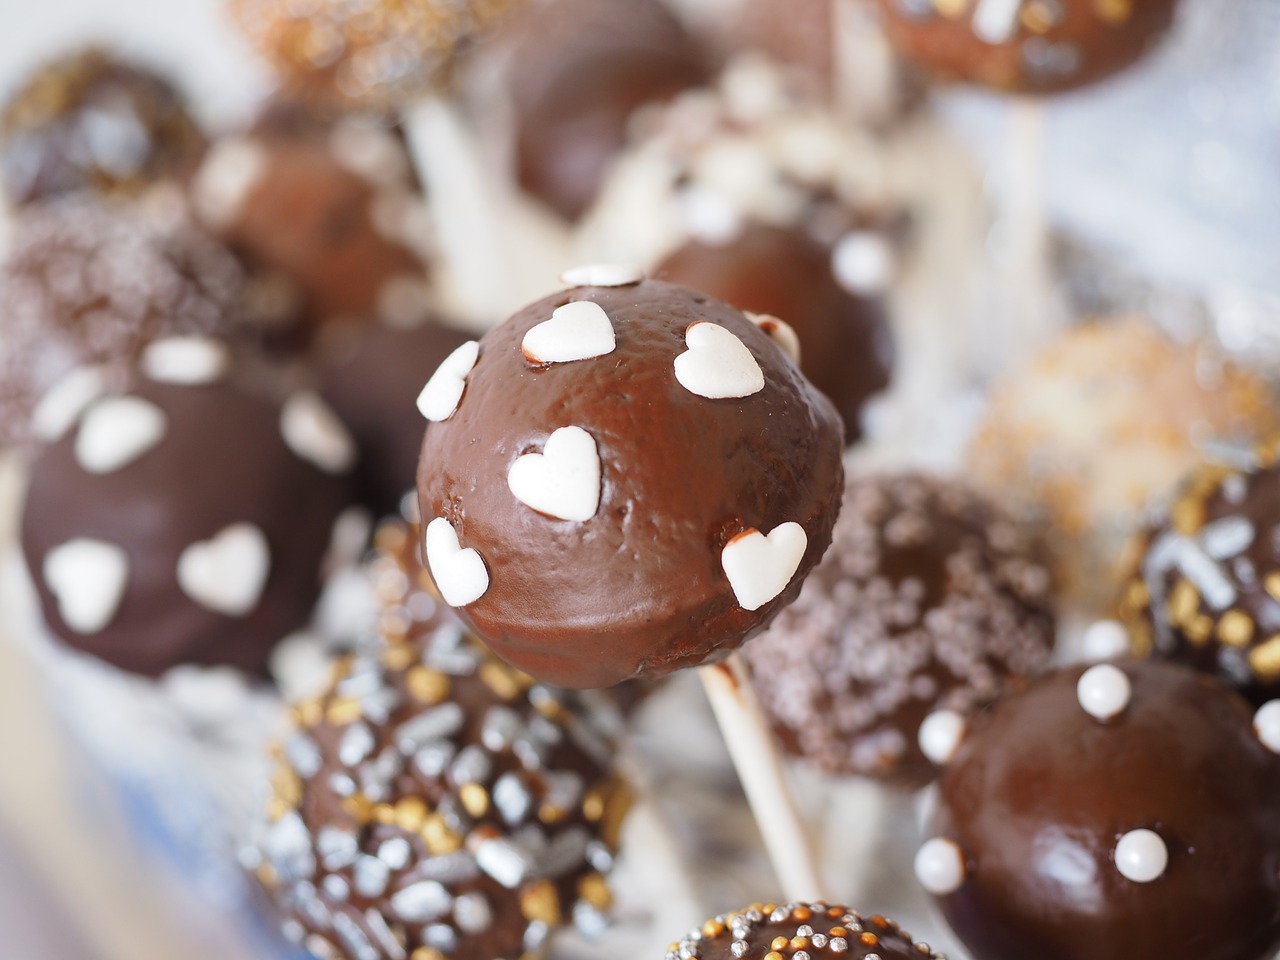 Upgrade Your Snacking With These Easy-To-Make Cannabis Cake Balls